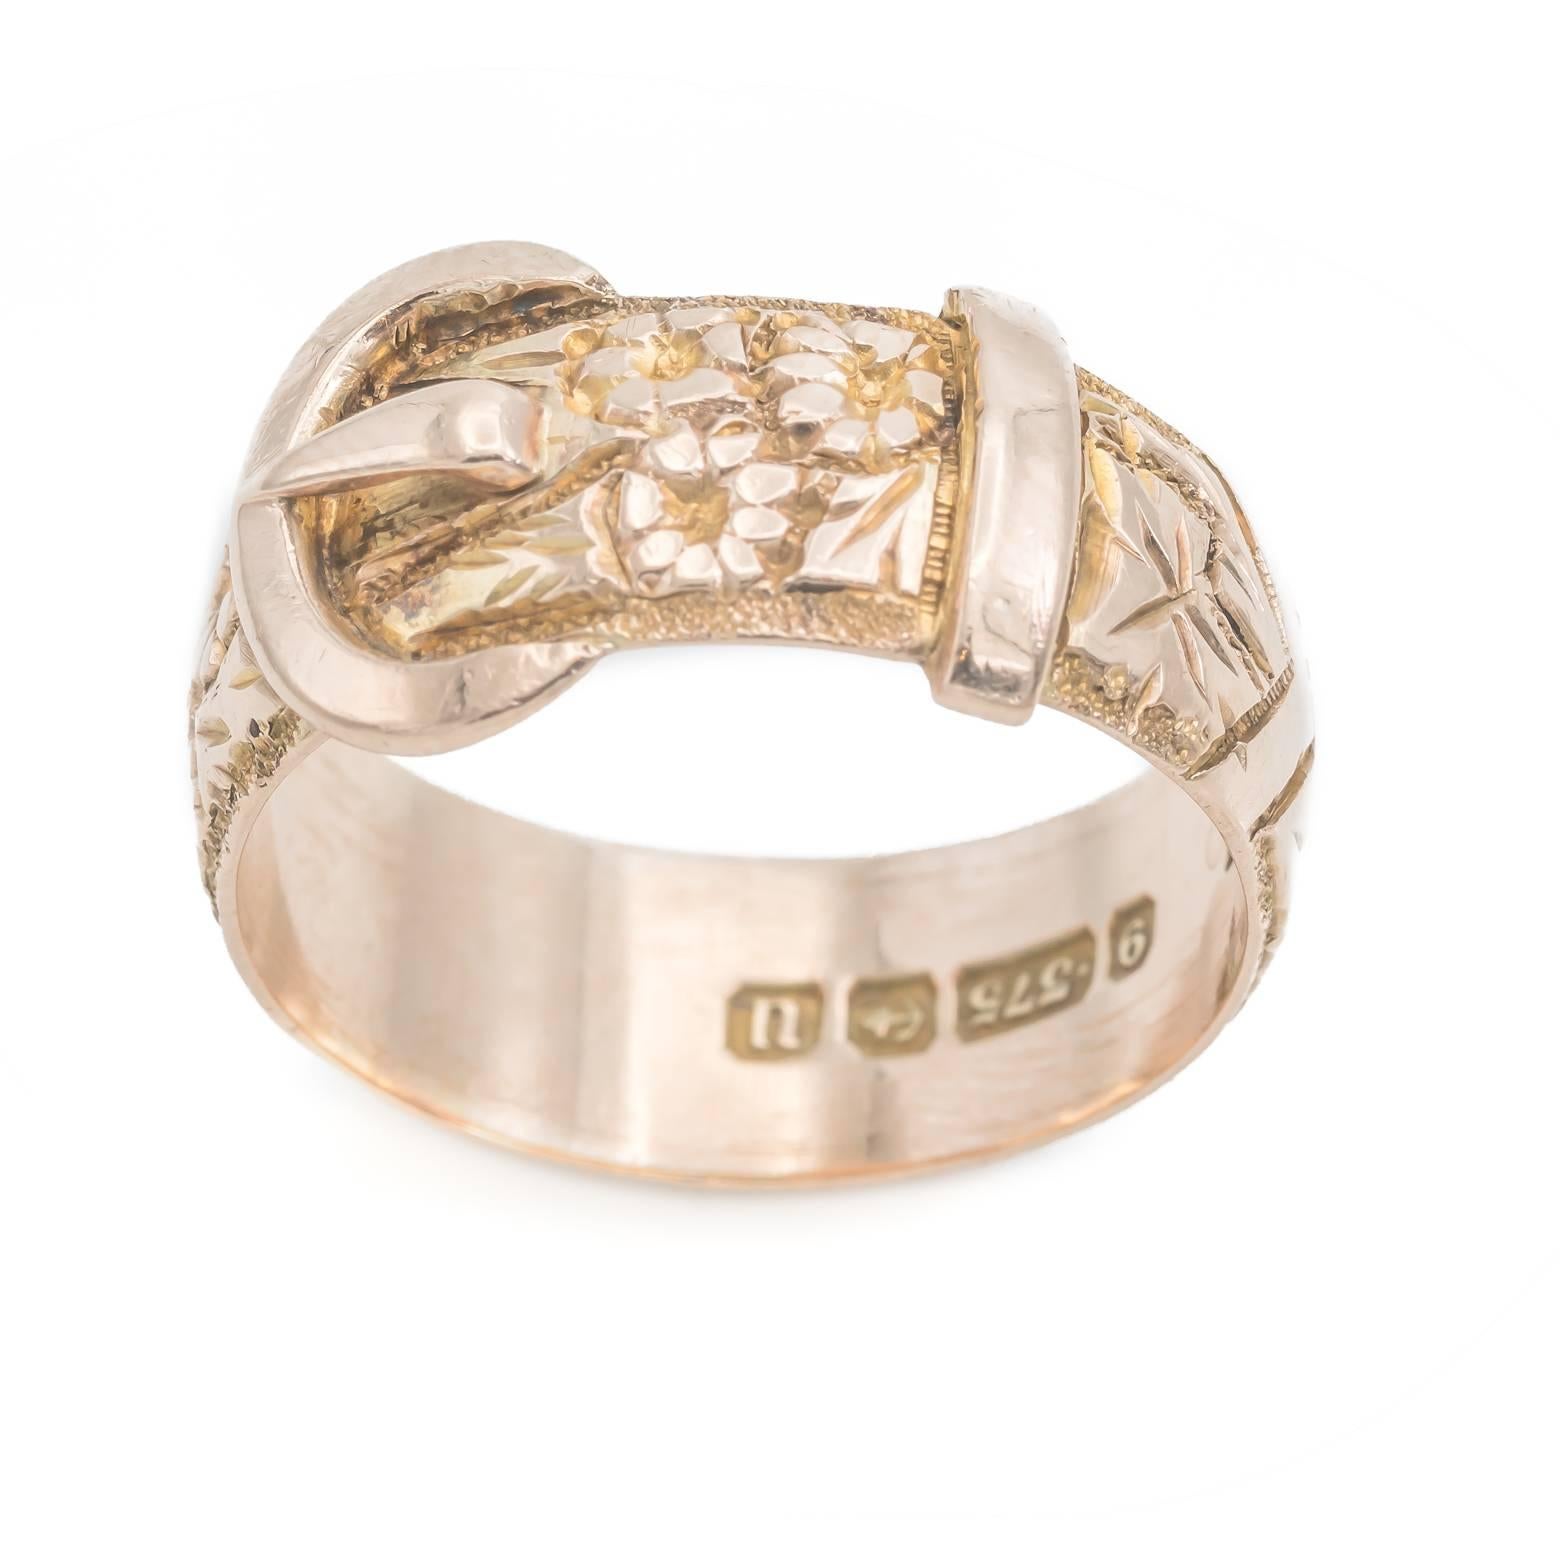 Made in 1919 this 9K gold ring is in impeccable shape and has a rosy color to the Gold. An antique belt ring that has exquisite detail with engraved flowers and leaves. Made in Birmingham, size 9.5